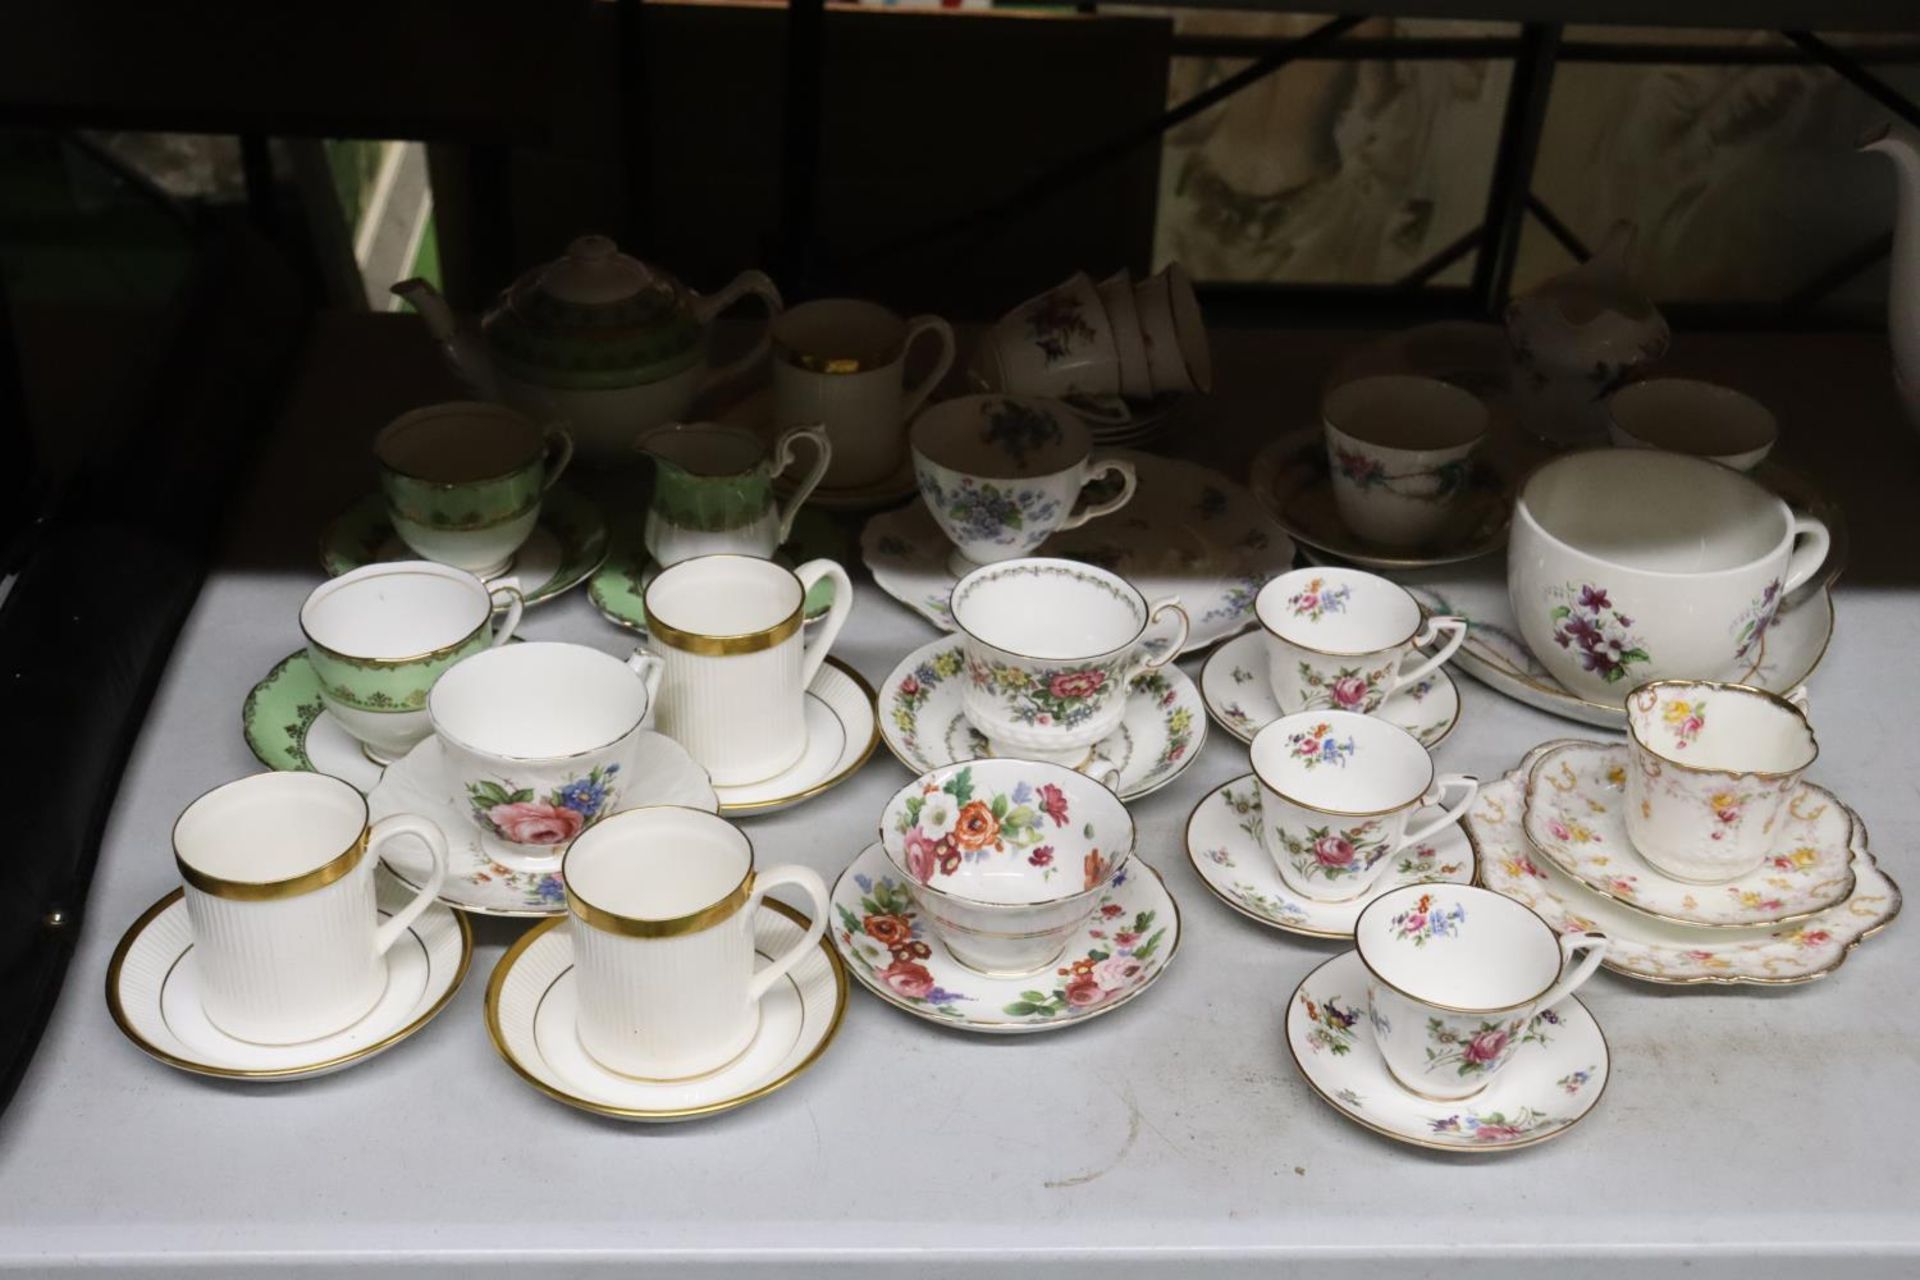 A LARGE QUANTITY OF VINTAGE CUPS, SAUCERS, PLATES, ETC TO INCLUDE ROYAL WORCESTER 'ABLA', CROWN